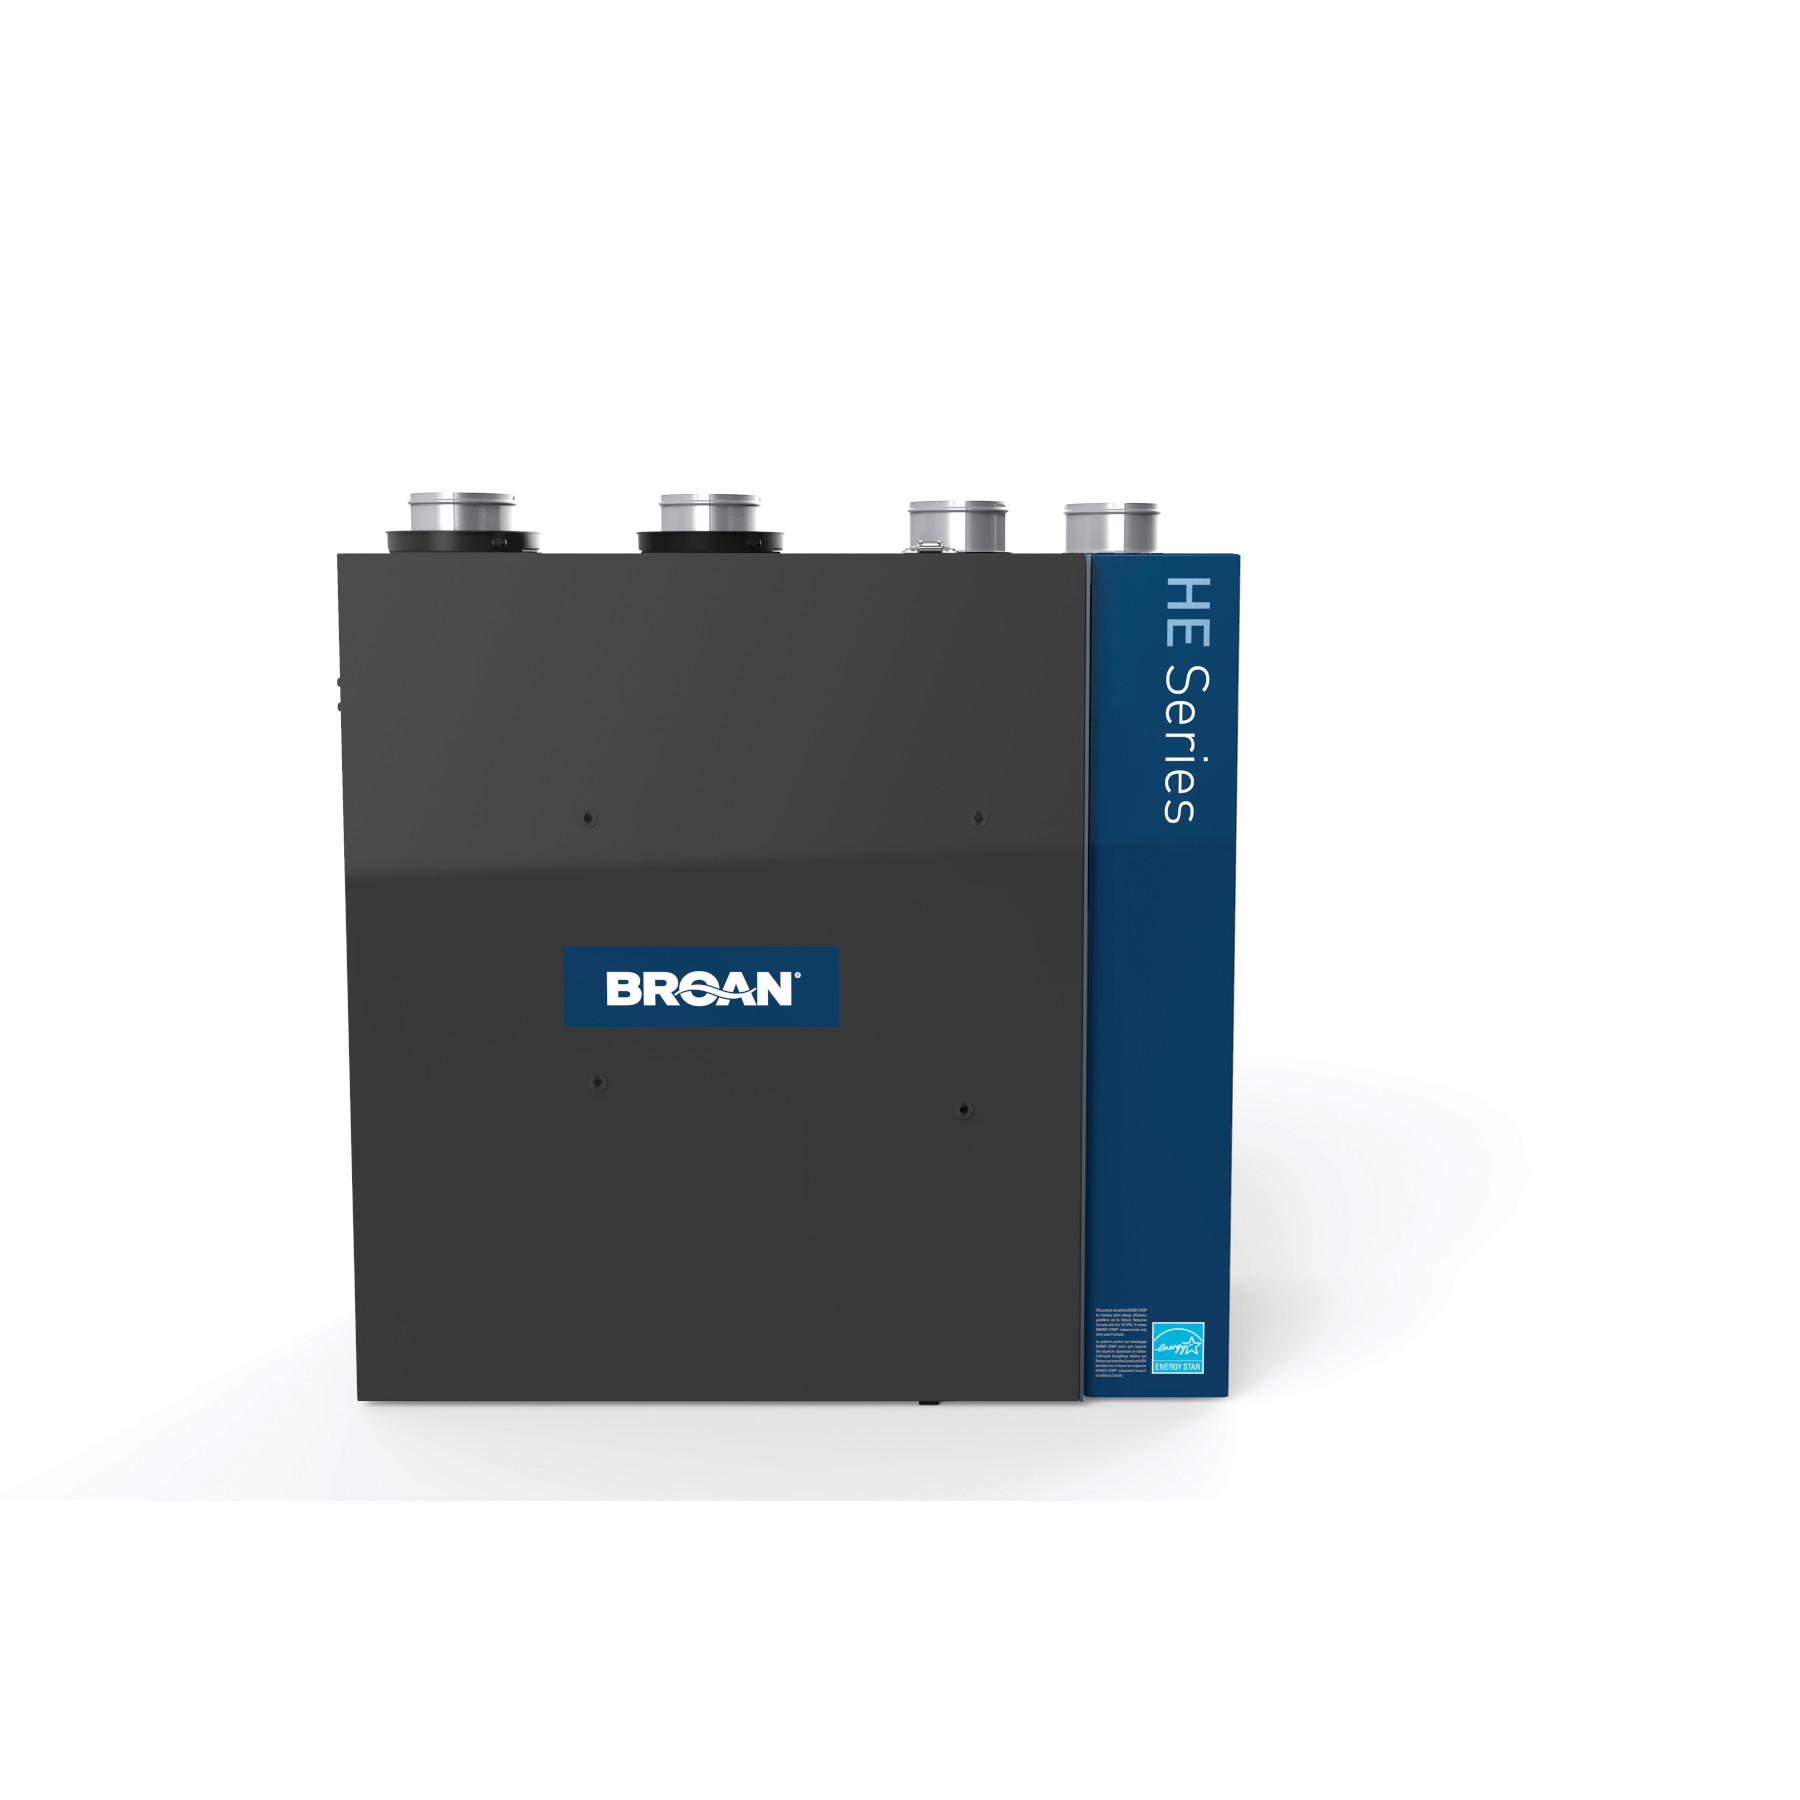 Broan® HE Series Energy Recovery Ventilator, 241 CFM at 0.4 in. w.g.